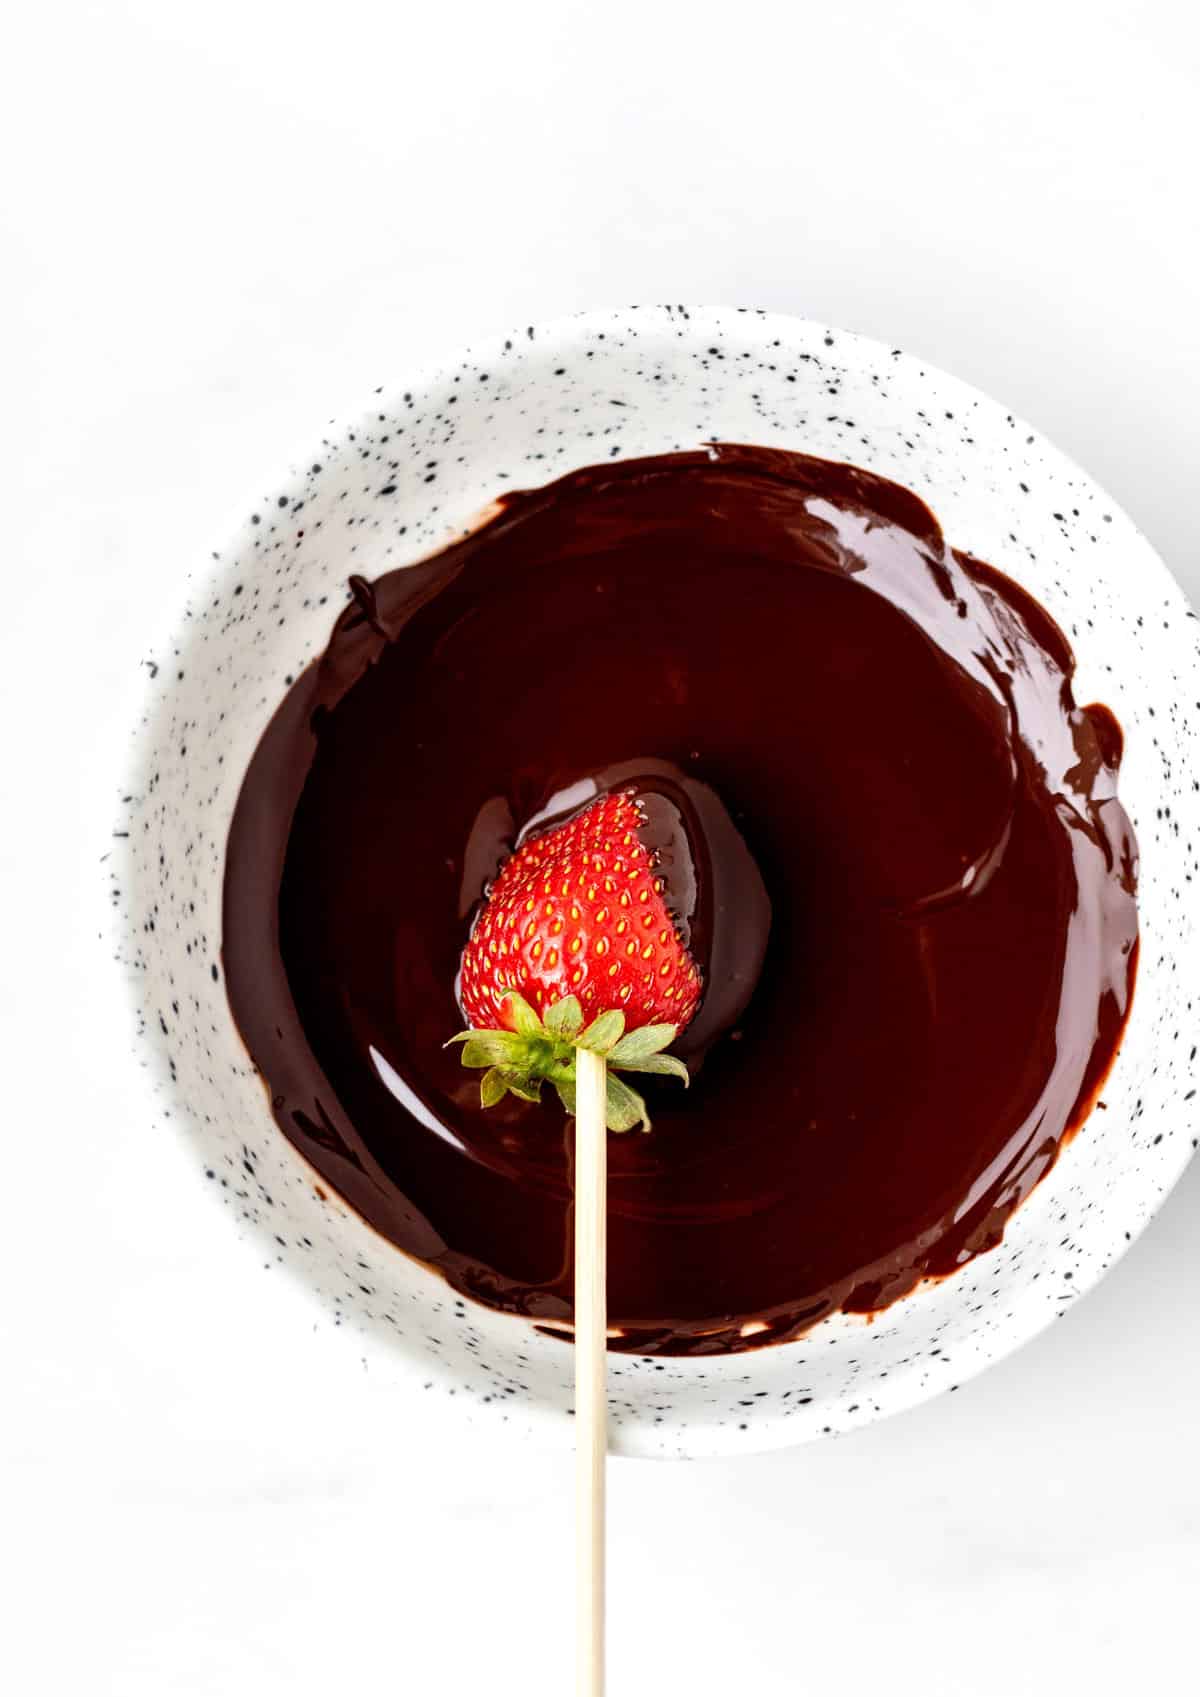 A strawberry on a wooden skewer being dipped diagonally in a bowl of melted chocolate.